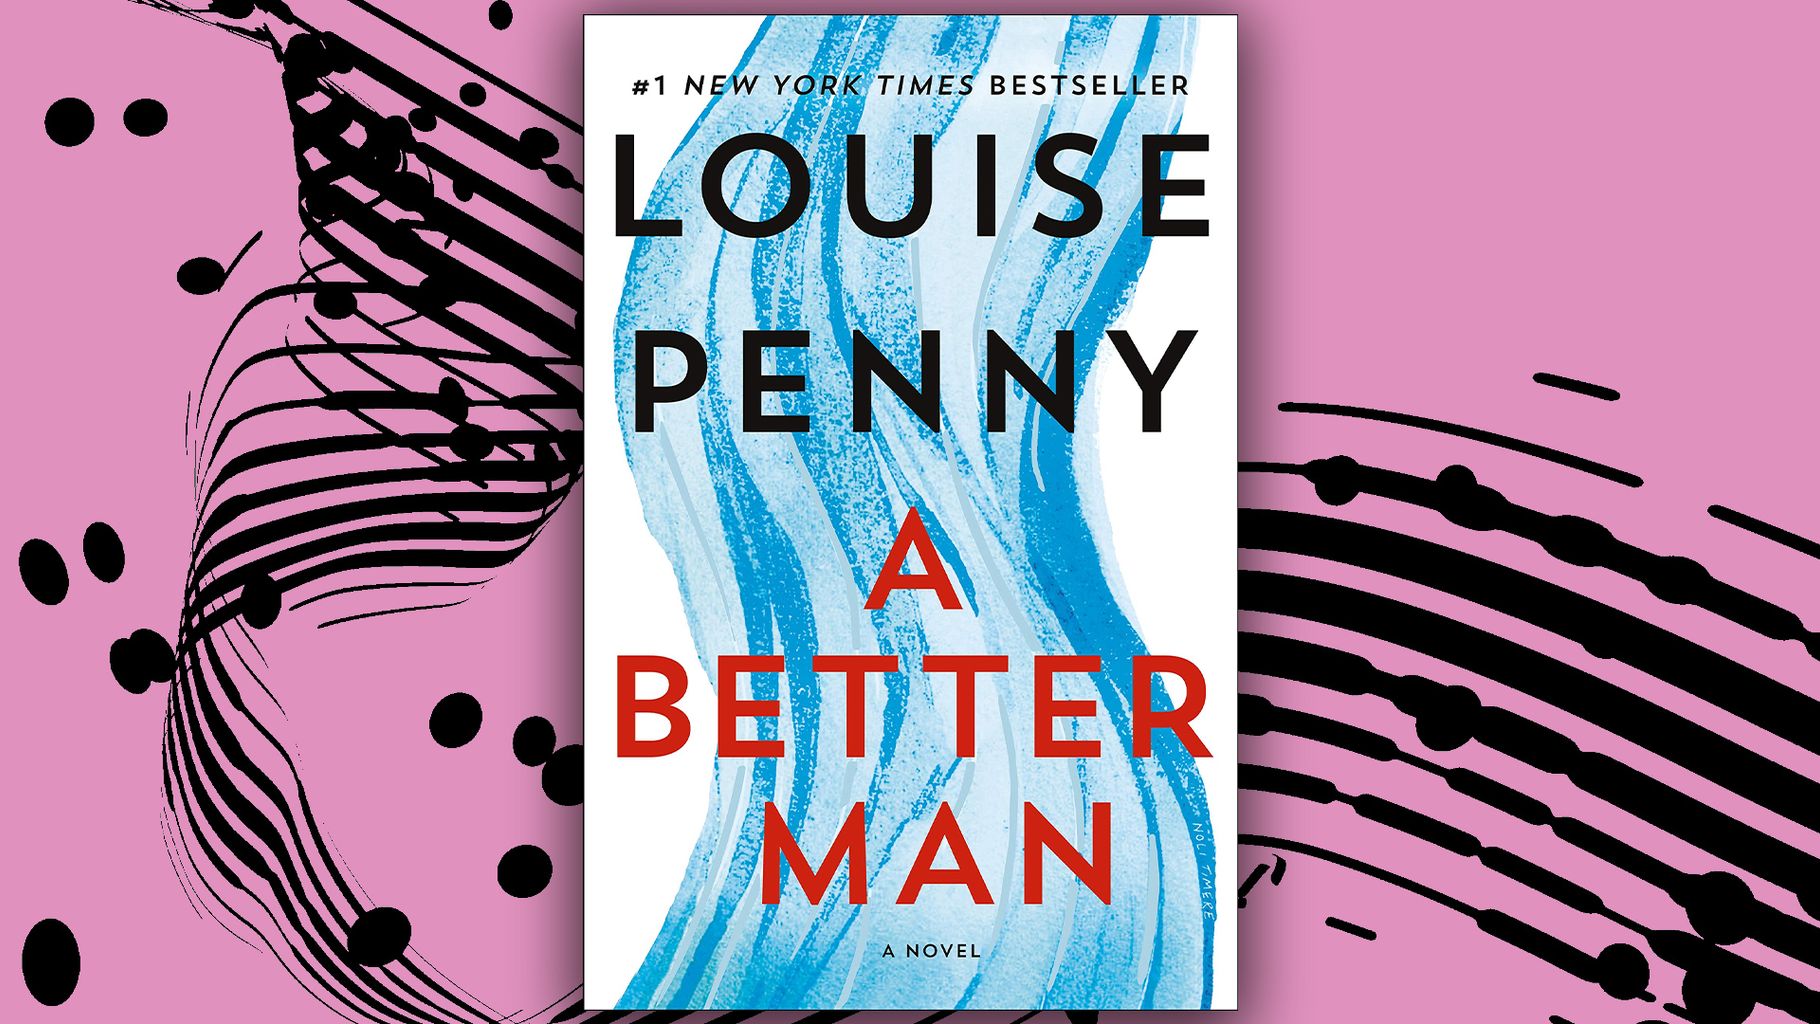 Scala Radio Book Club A Better Man by Louise Penny